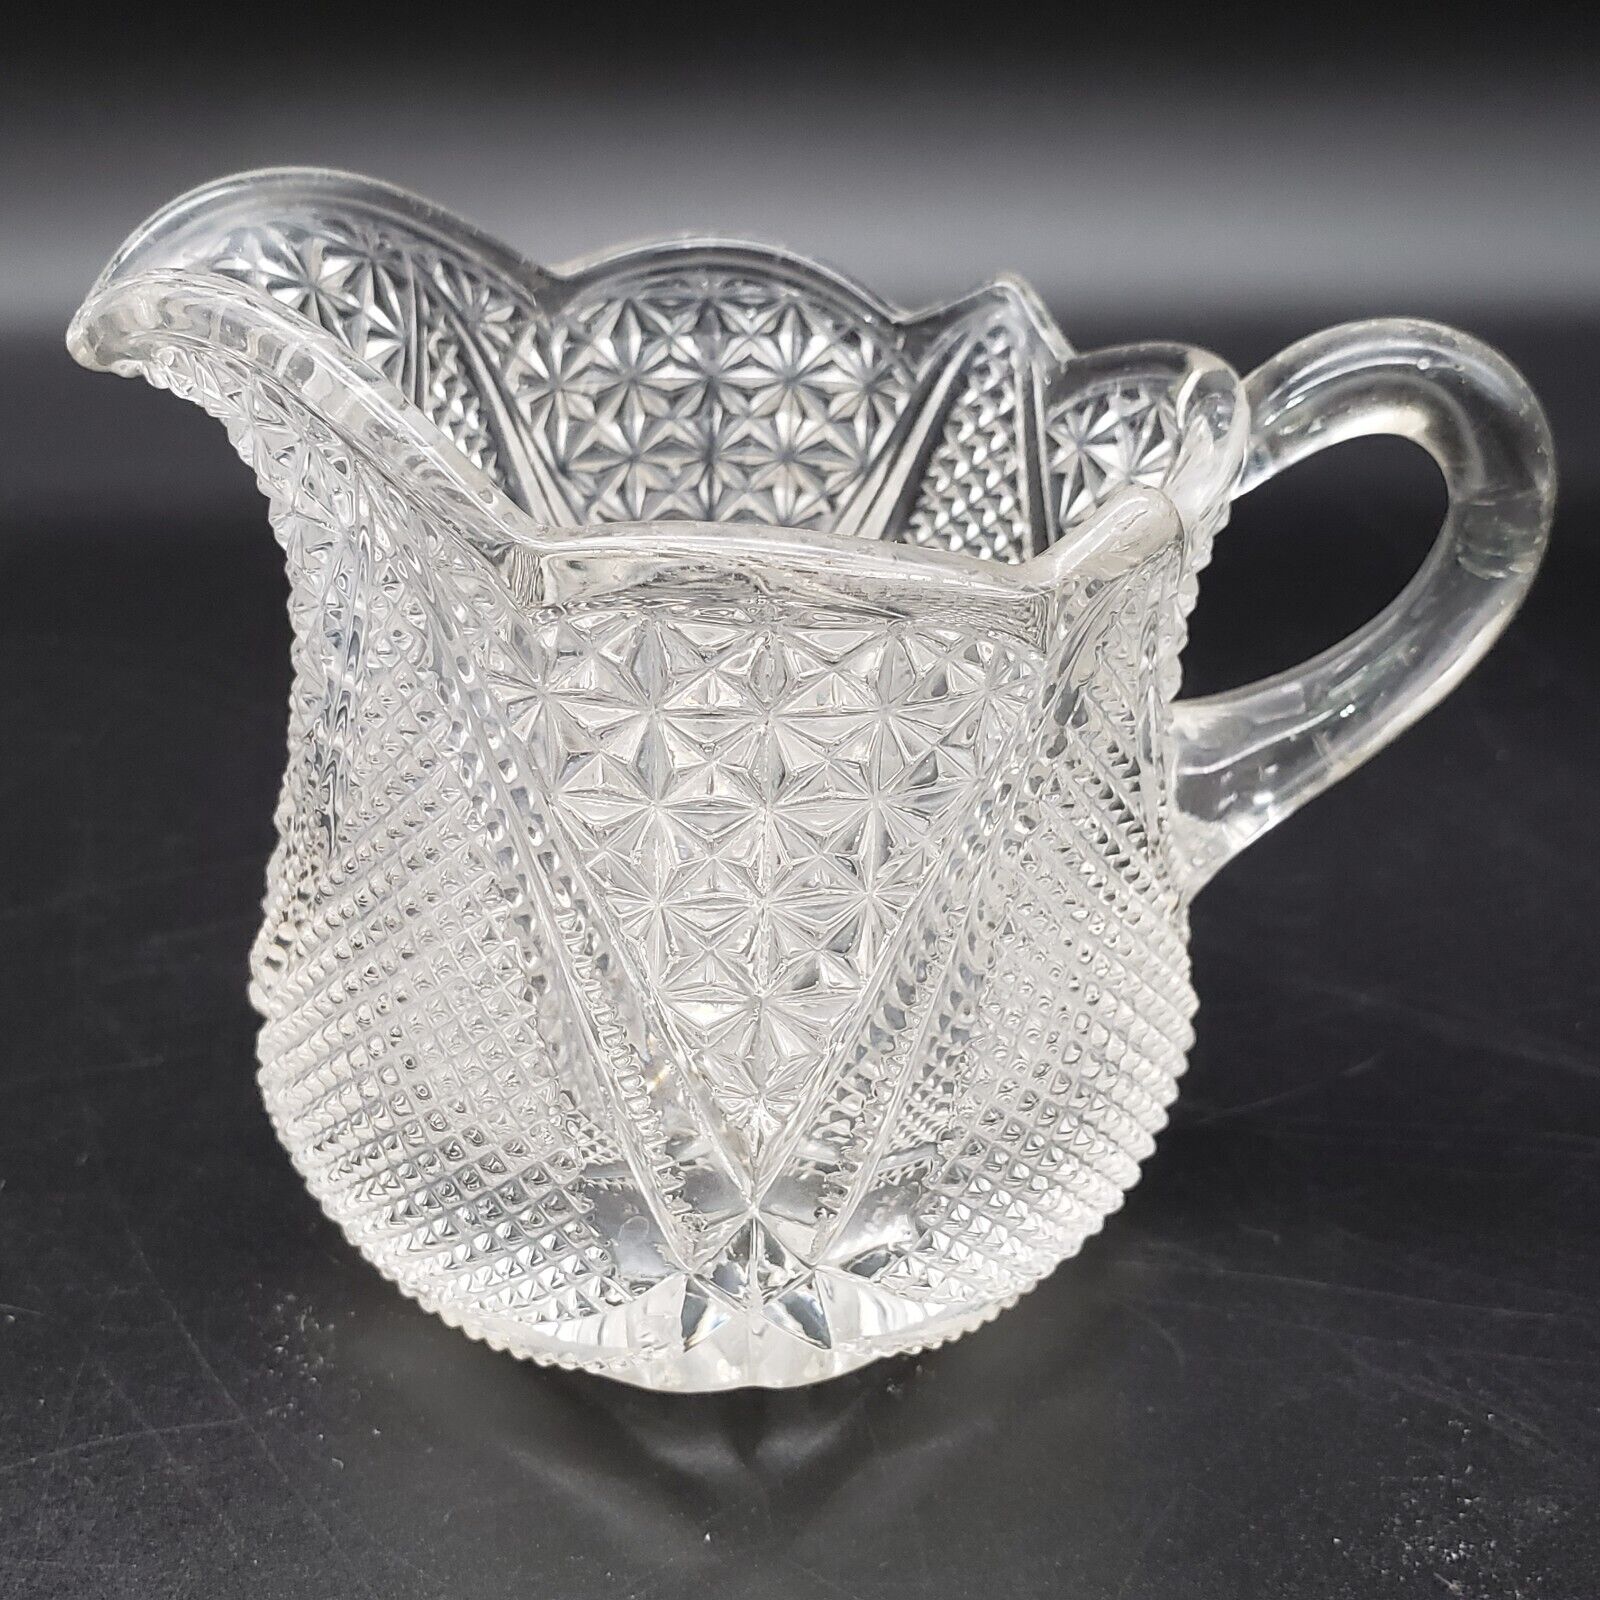 Antique Fandango by Heisey Pressed Glass Creamer Diamonds and Arches 1896-1905